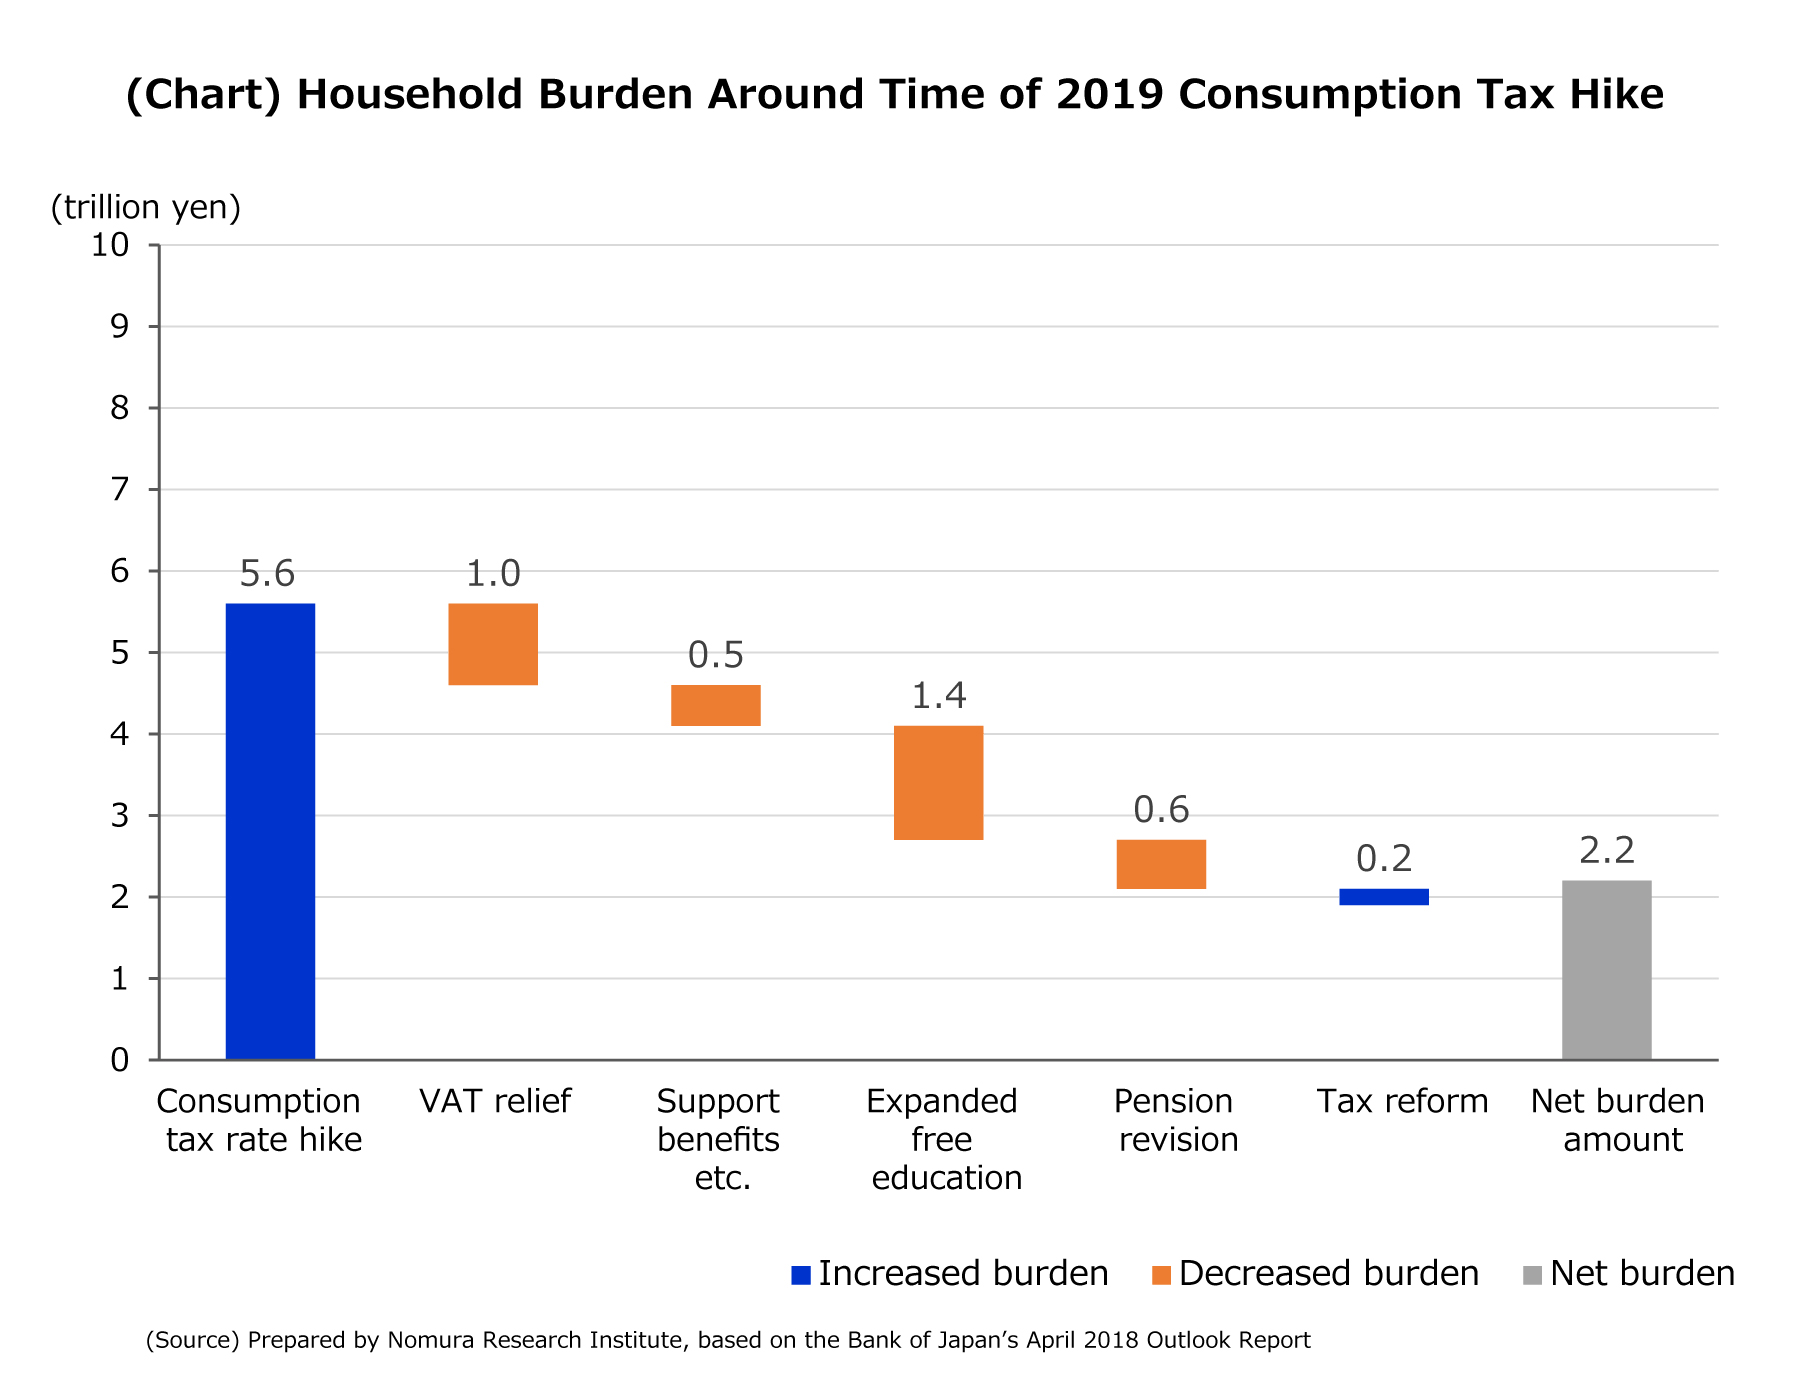 (Chart) Household Burden Around Time of 2019 Consumption Tax Hike